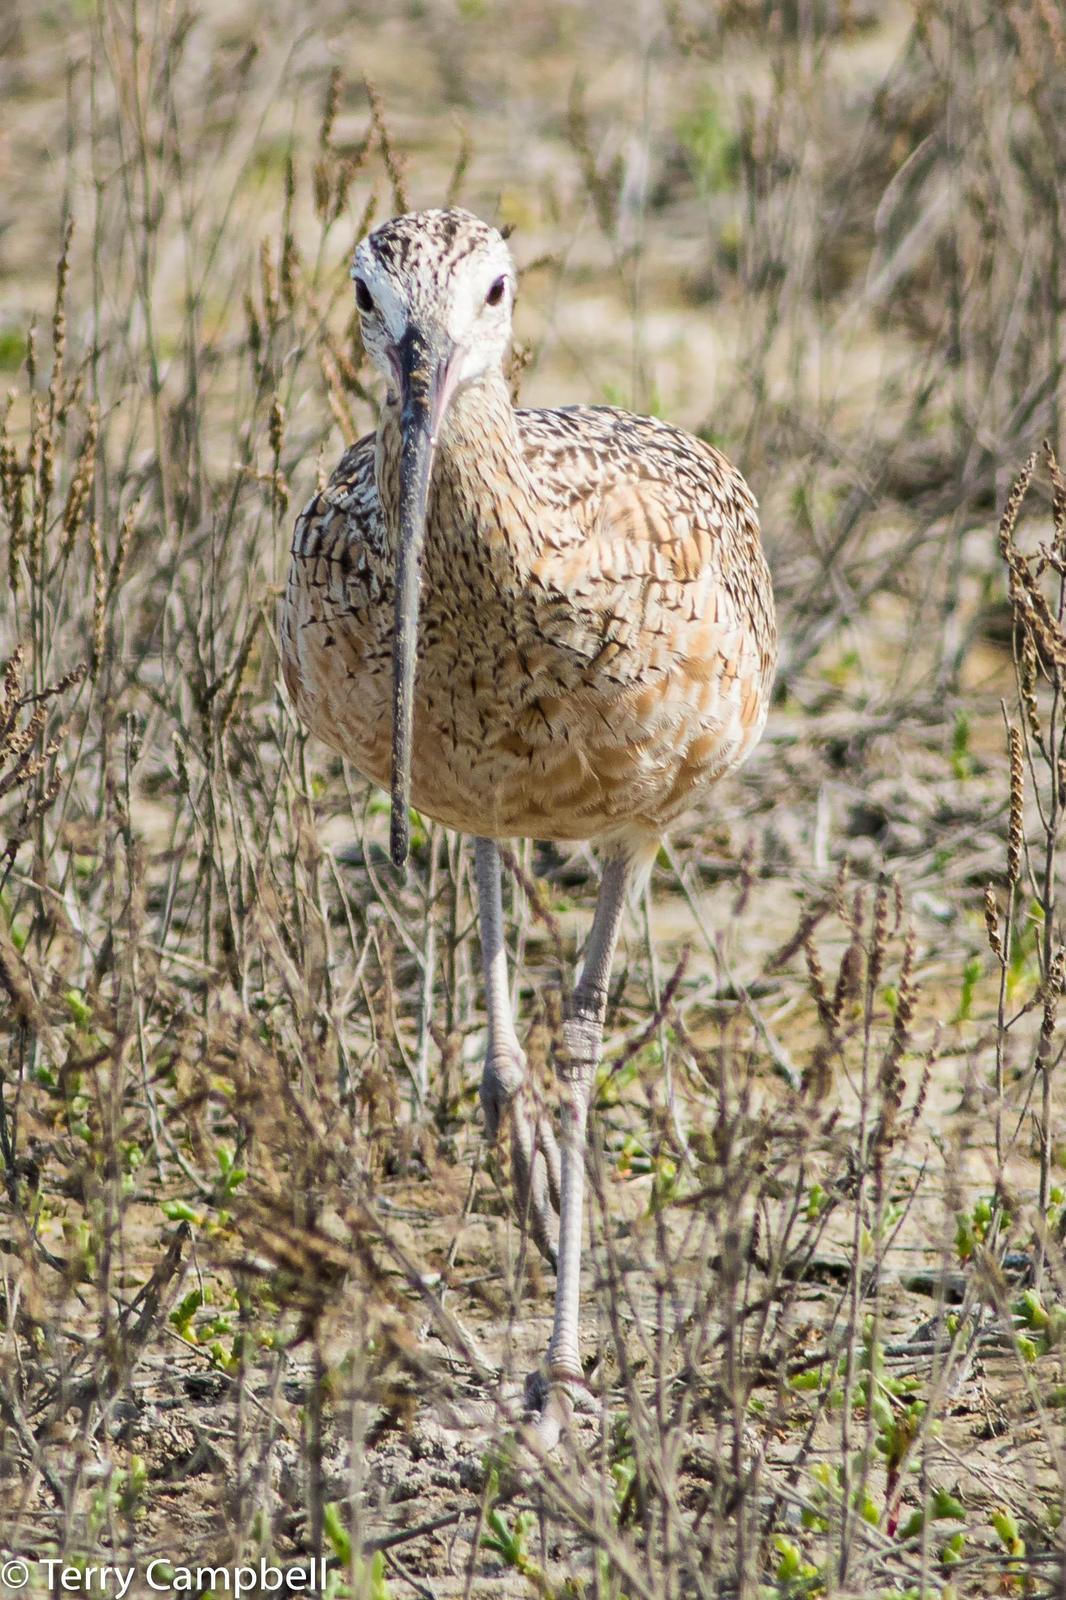 Long-billed Curlew Photo by Terry Campbell